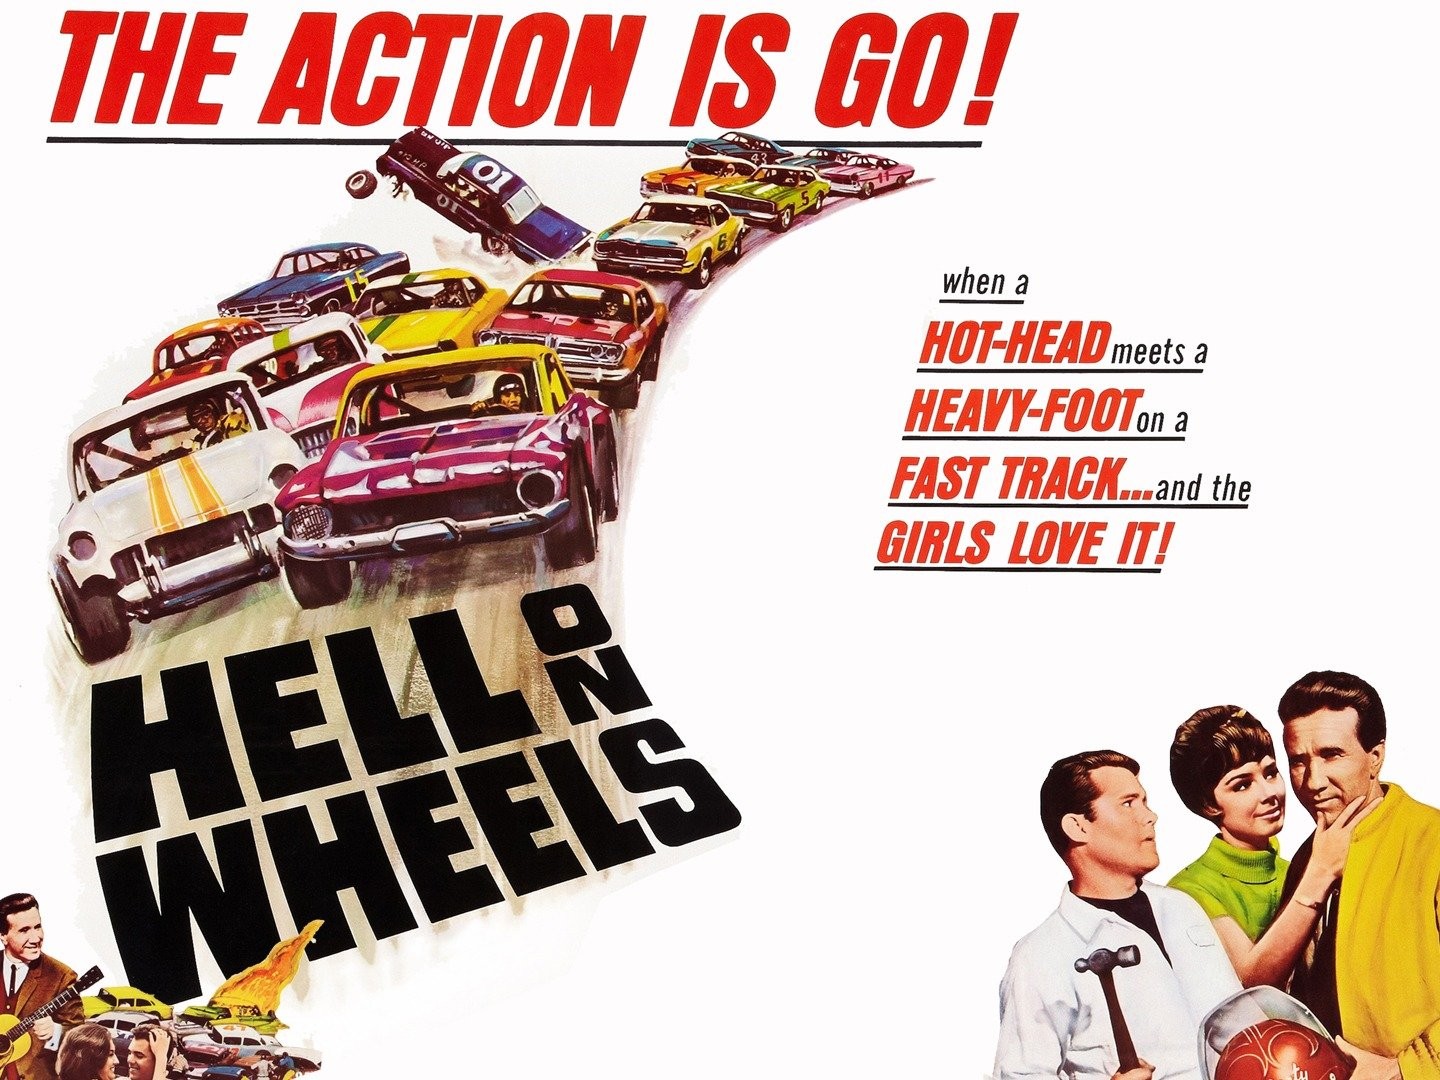 Hell on Wheels ((how do I still have a license)) — Is there a